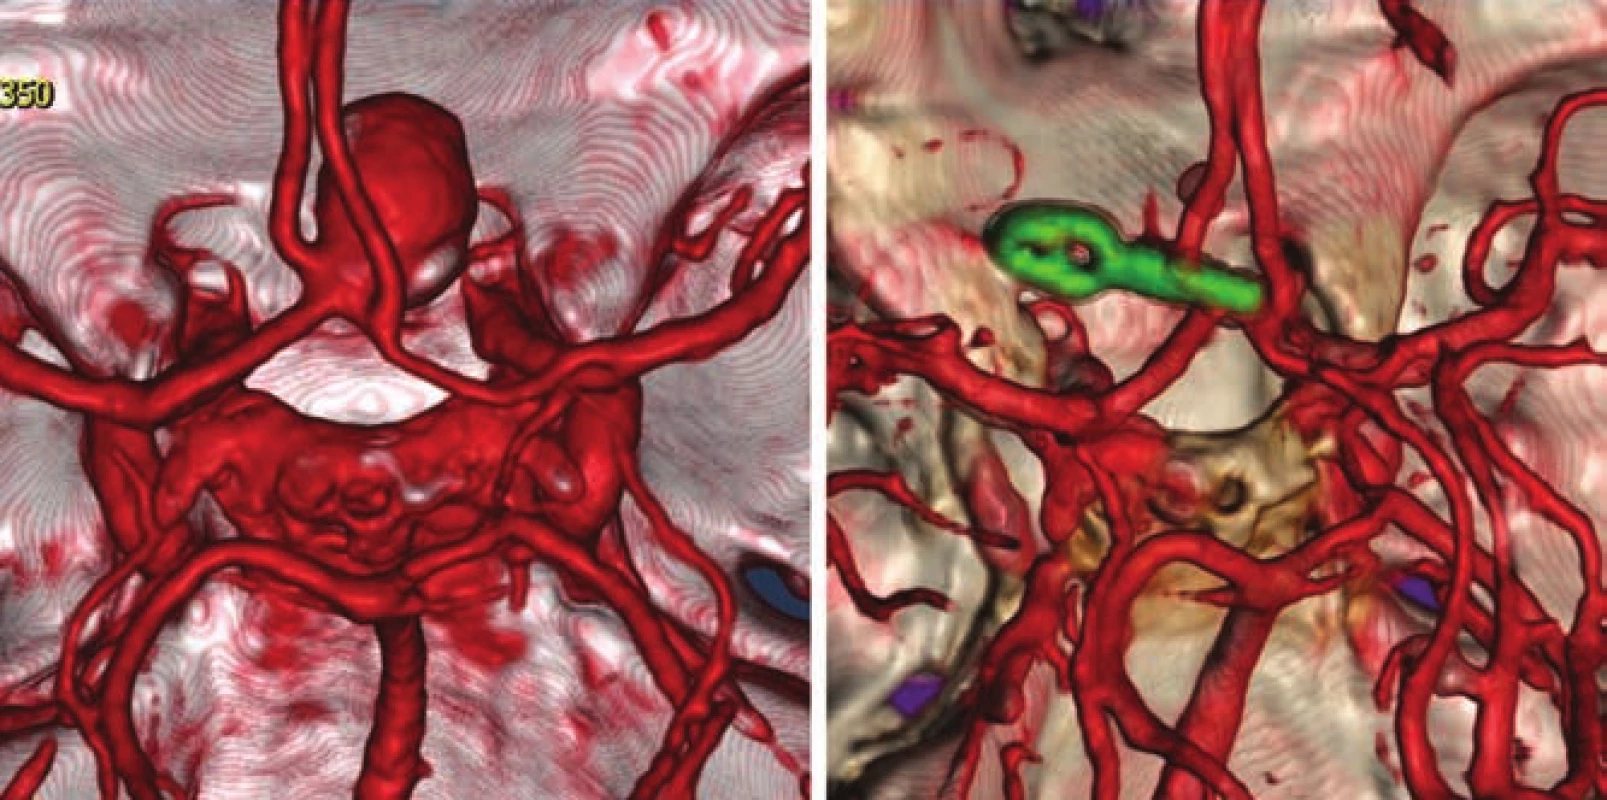 CTA aneuryzmatu arteria communicans anterior před a po clippingu.<br>
Fig. 4. CTA of the anterior communicating artery aneurysm before and after clipping.